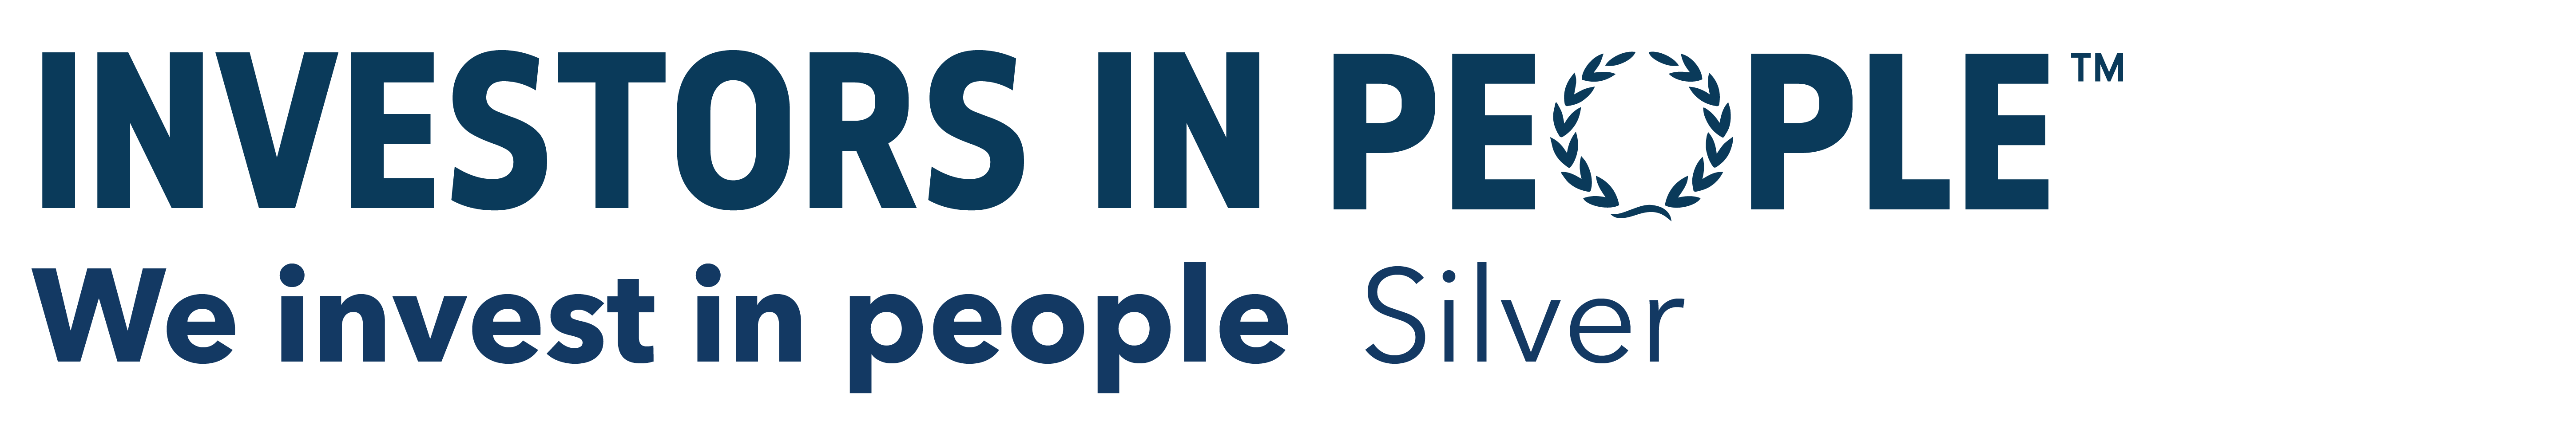 Awards and recognitions slider we-invest-in-people-silver-blue 2